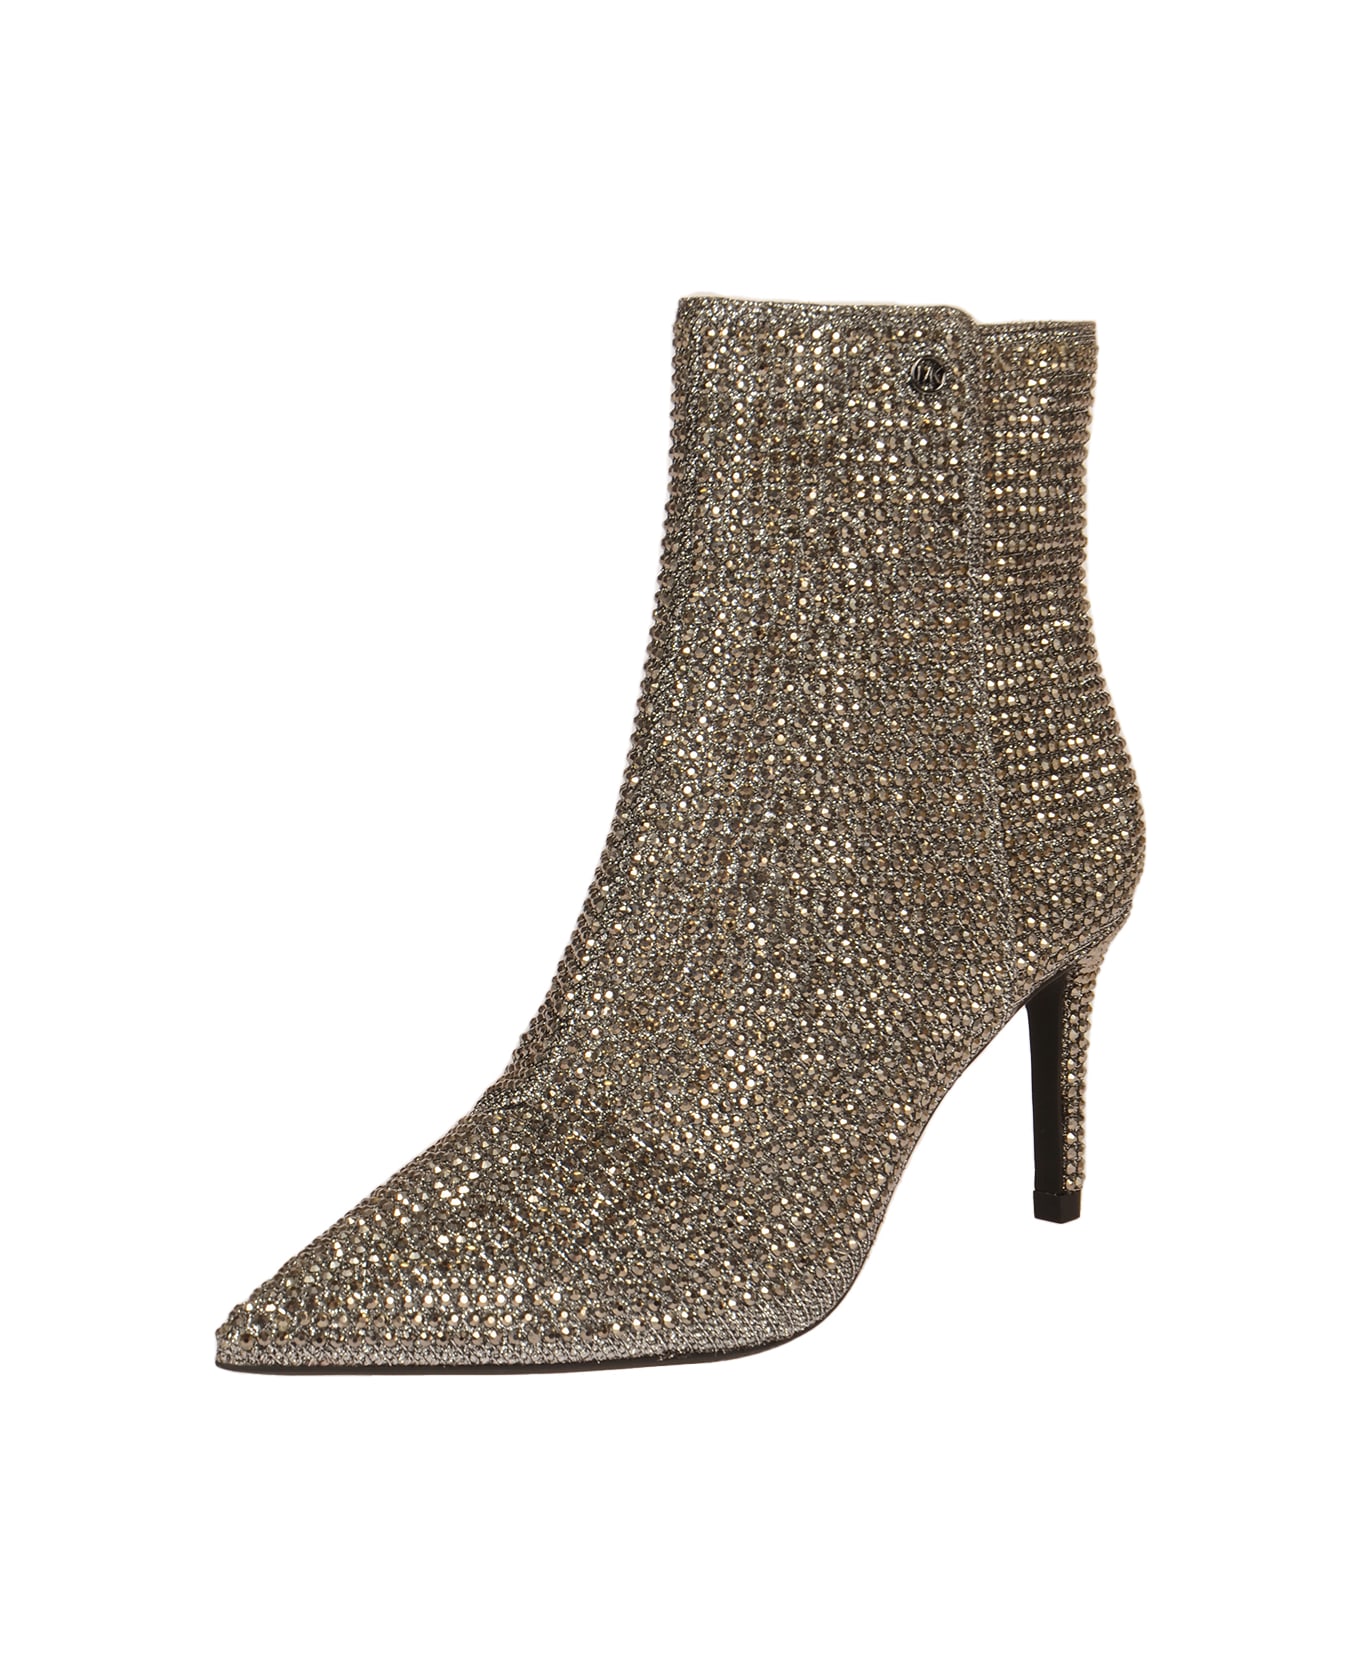 MICHAEL Michael Kors Aline Embellished Heeled Ankle Boots - Anthracite